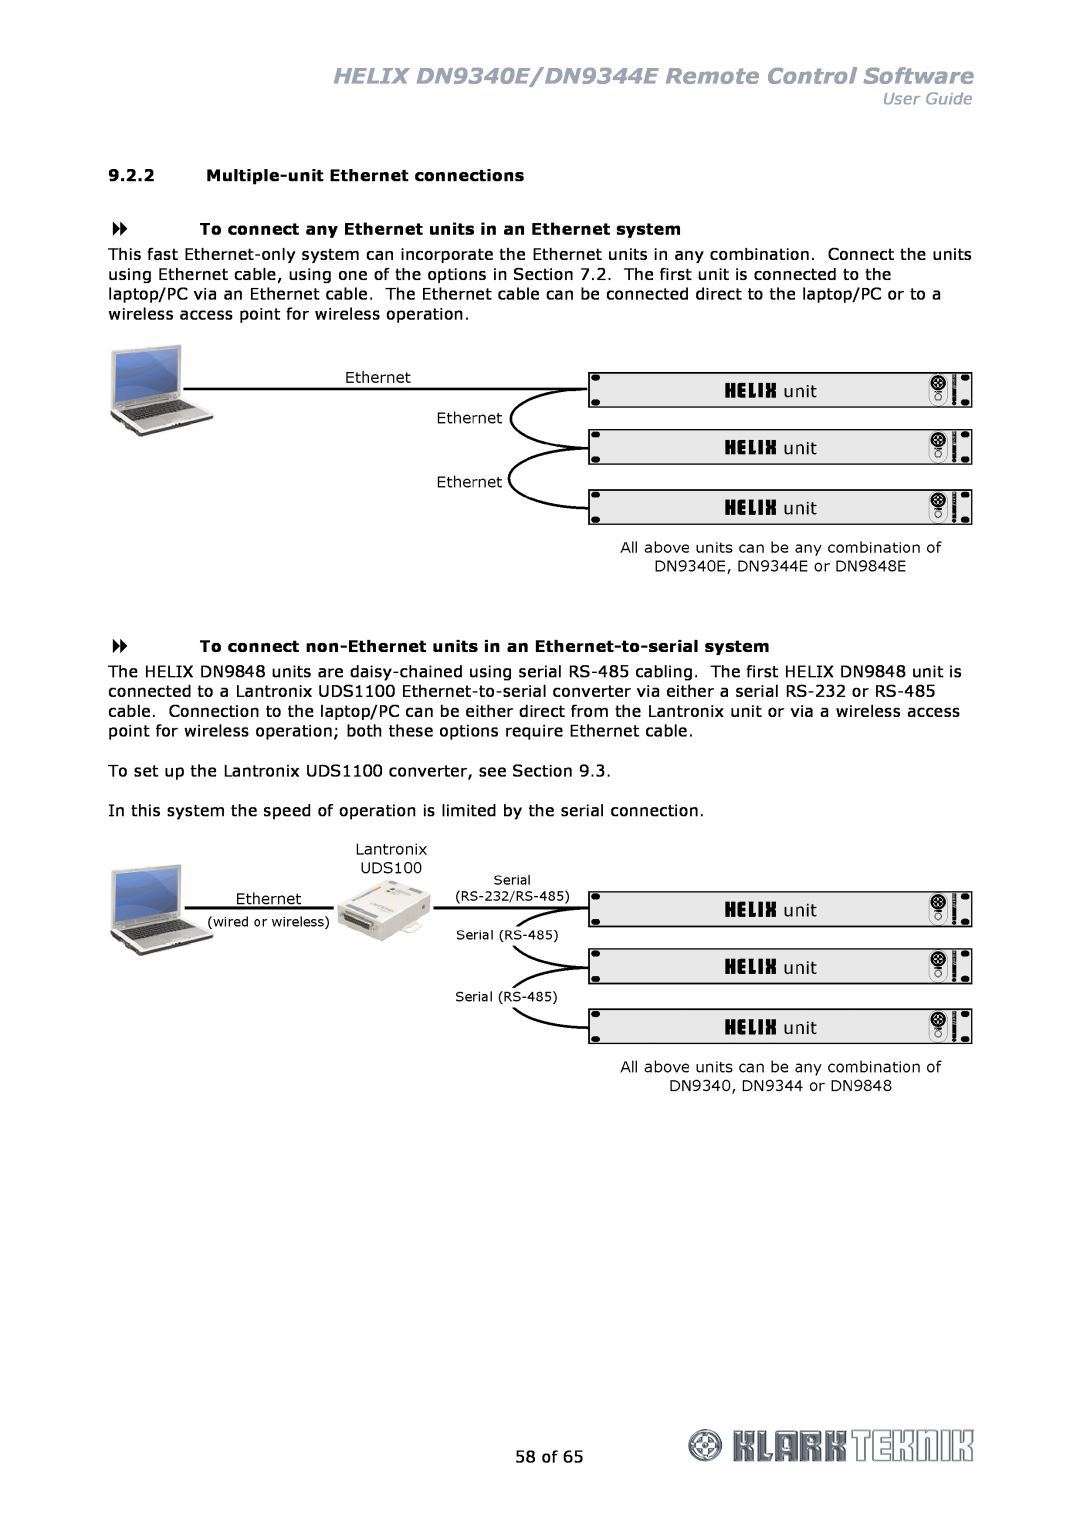 Klark Teknik DN9340E Multiple-unit Ethernet connections, To connect any Ethernet units in an Ethernet system, User Guide 